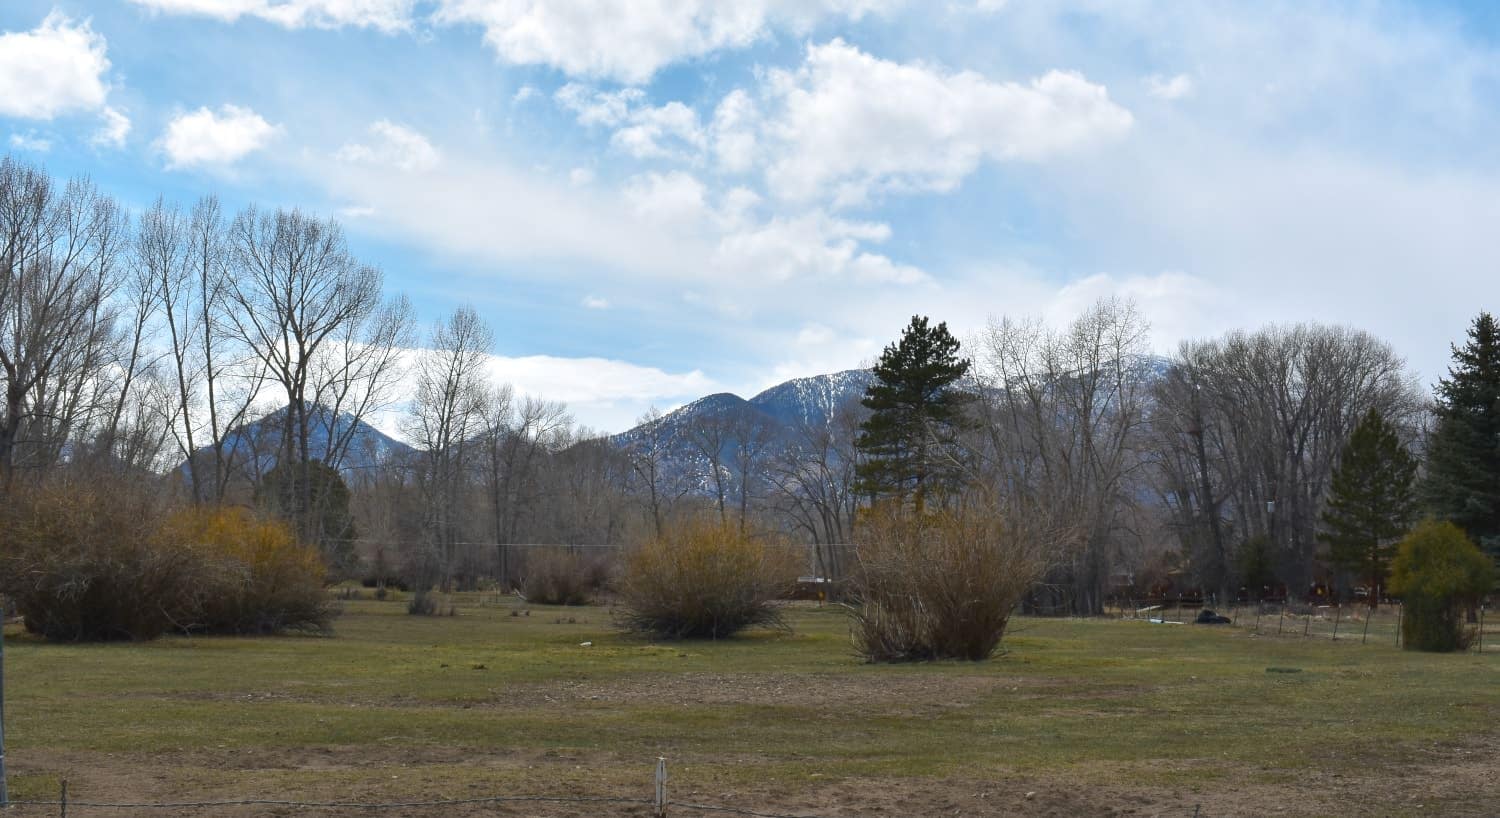 Green grassy field and large trees with snow capped mountains in the background